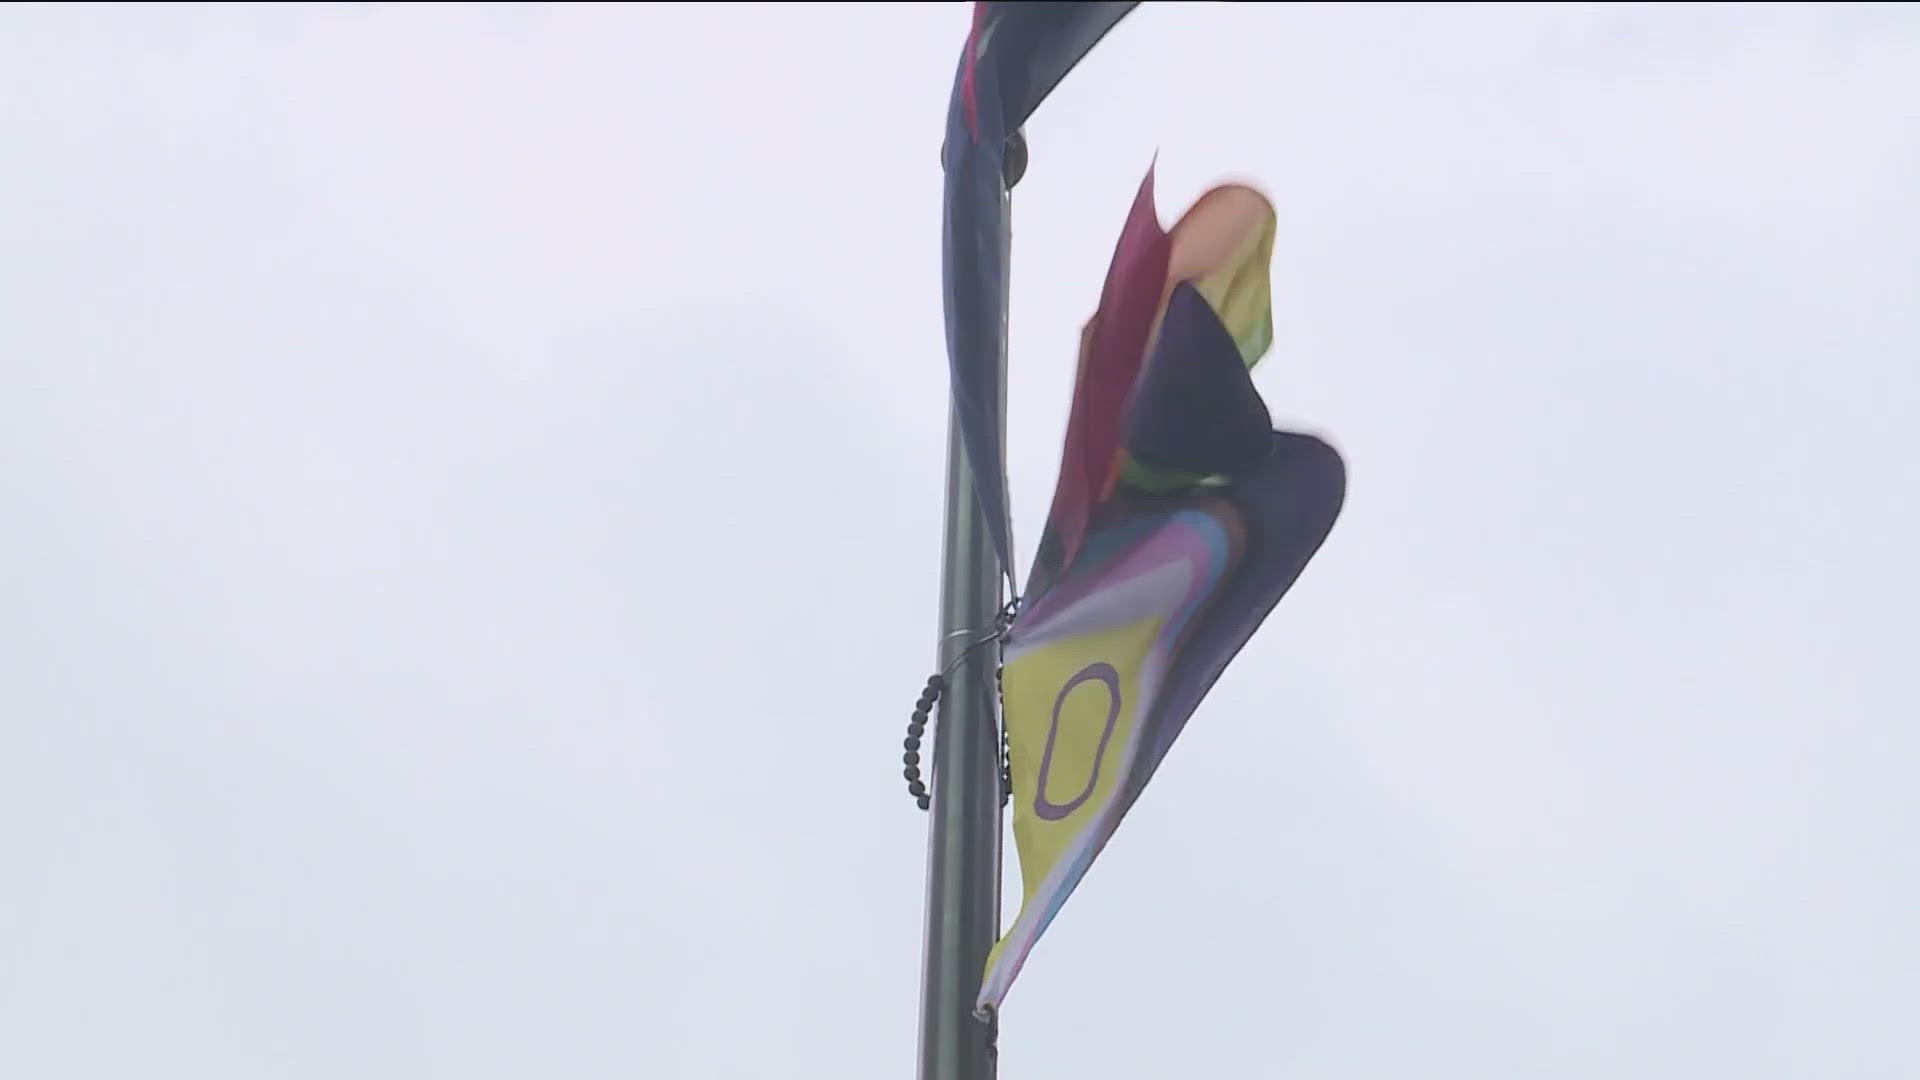 This is the third year Travis County has raised a pride flag.